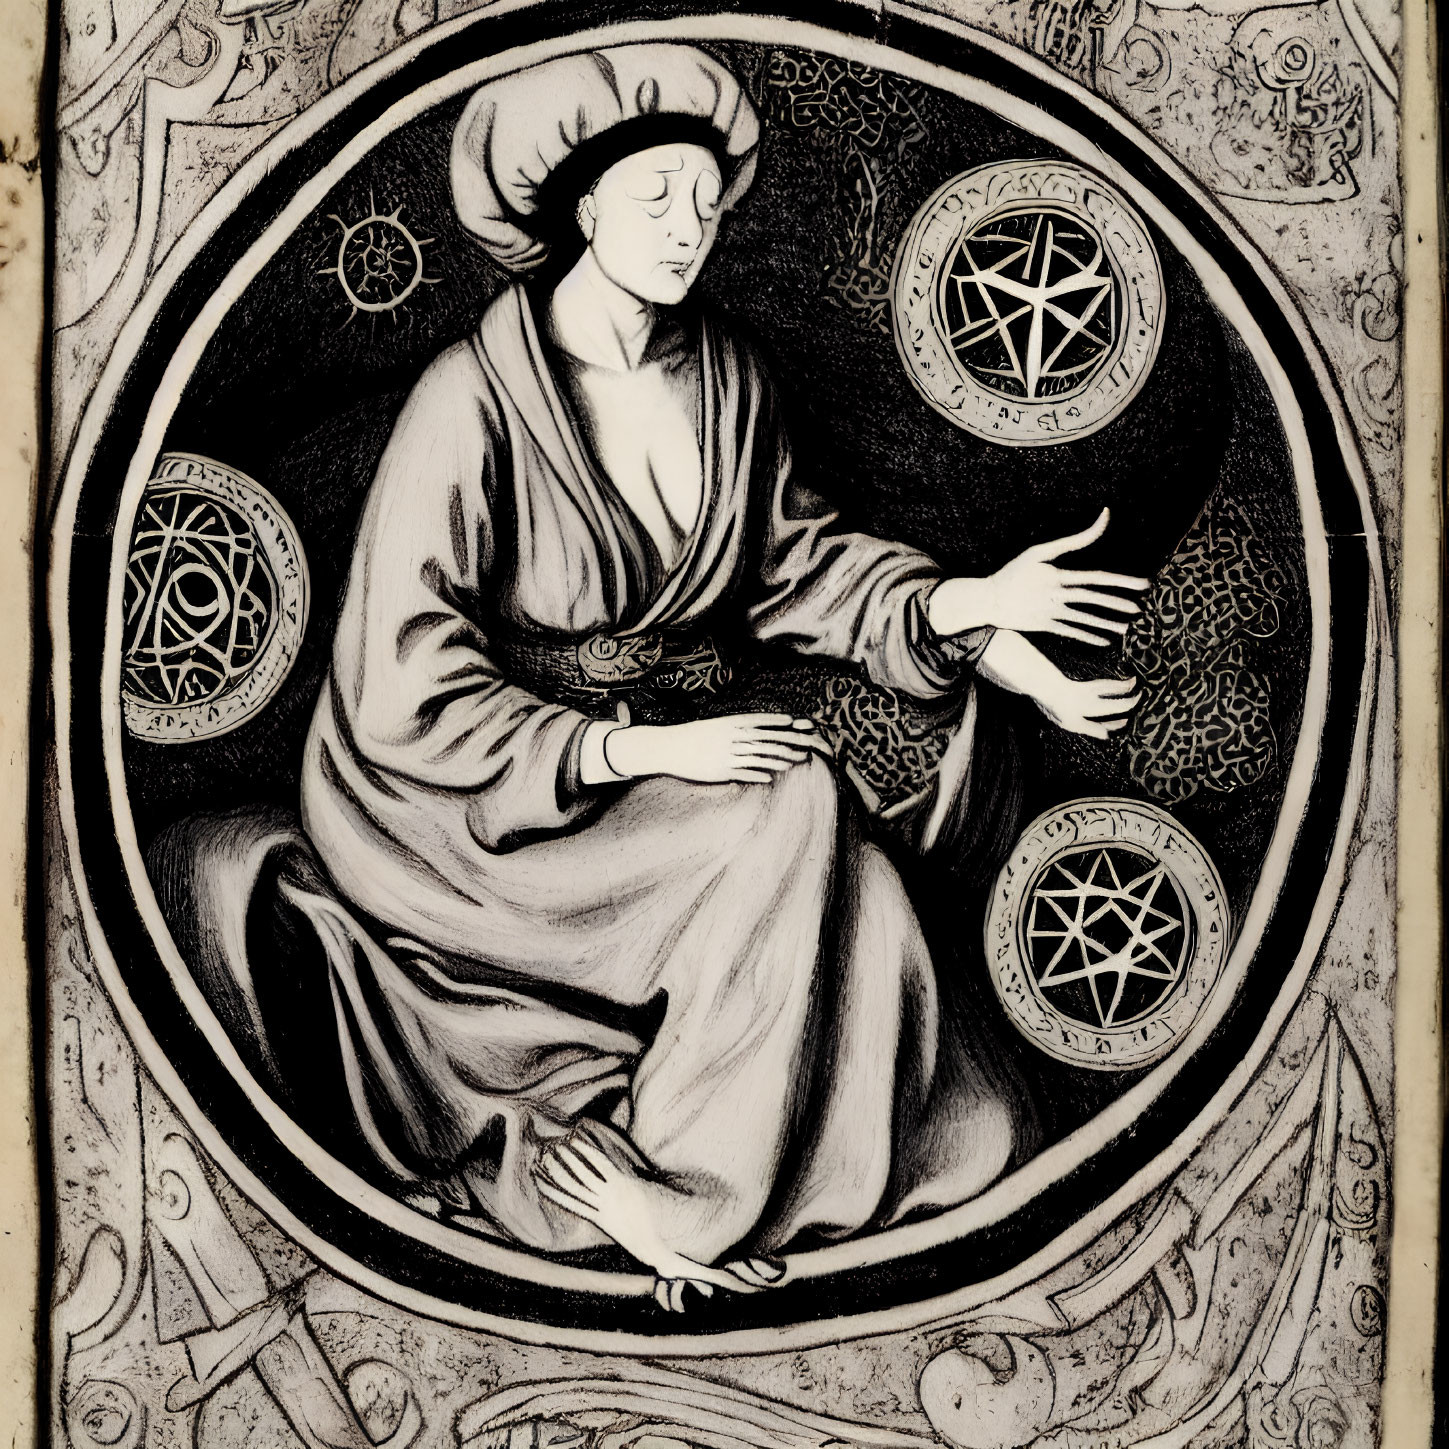 Medieval Illustration of Robed Figure with Halo and Ornate Circular Designs